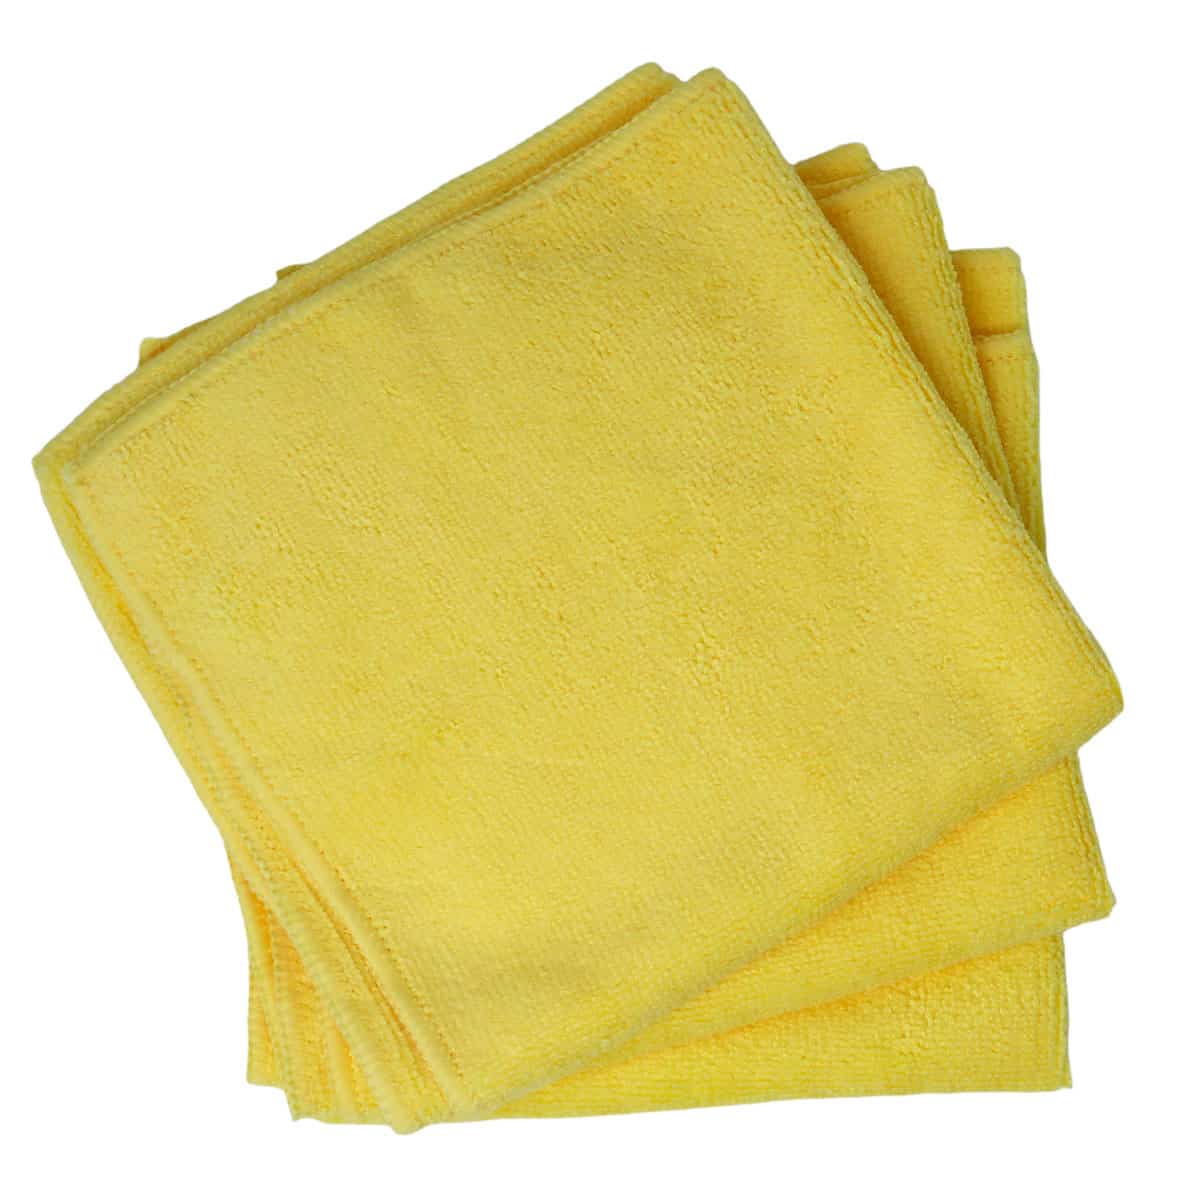 Chemical Guys Ultra Fine Microfiber Towels 16"x16" - 3pk: Ideal for interior cleaning top view